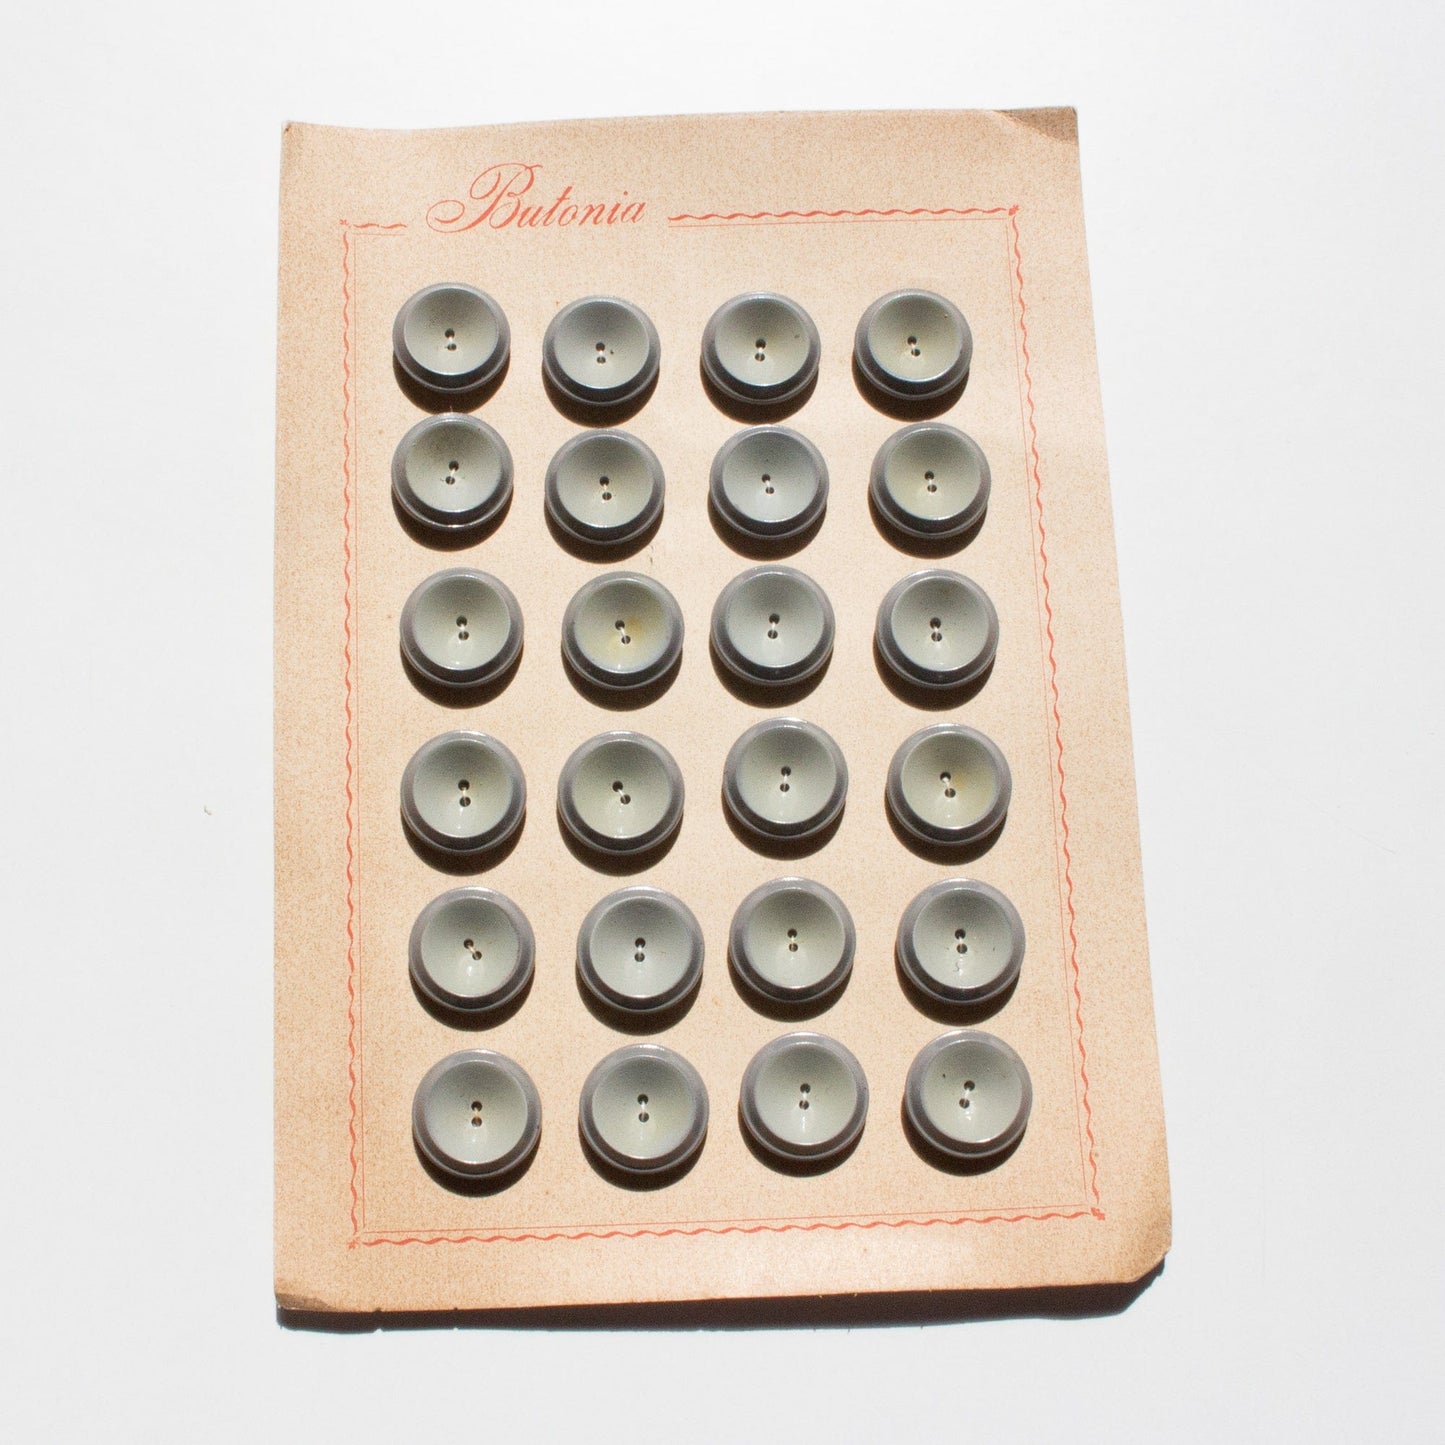 6 Vintage Italian Plastic Buttons in Shades of Grey - 20 mm